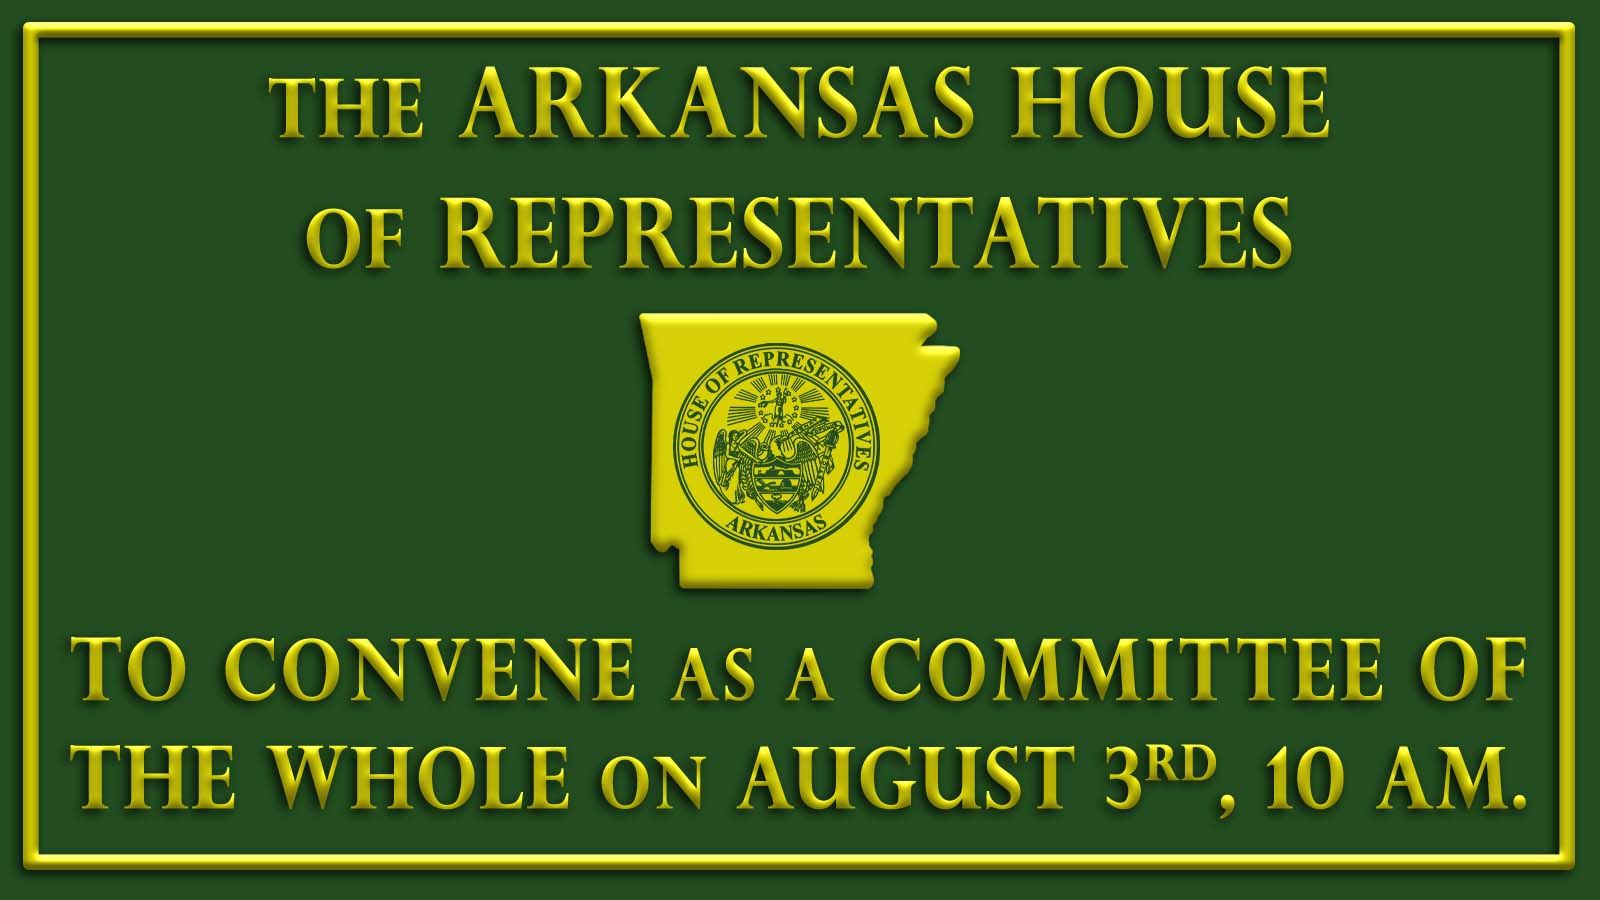 house-to-convene-on-august-3rd-at-10-am-arkansas-house-of